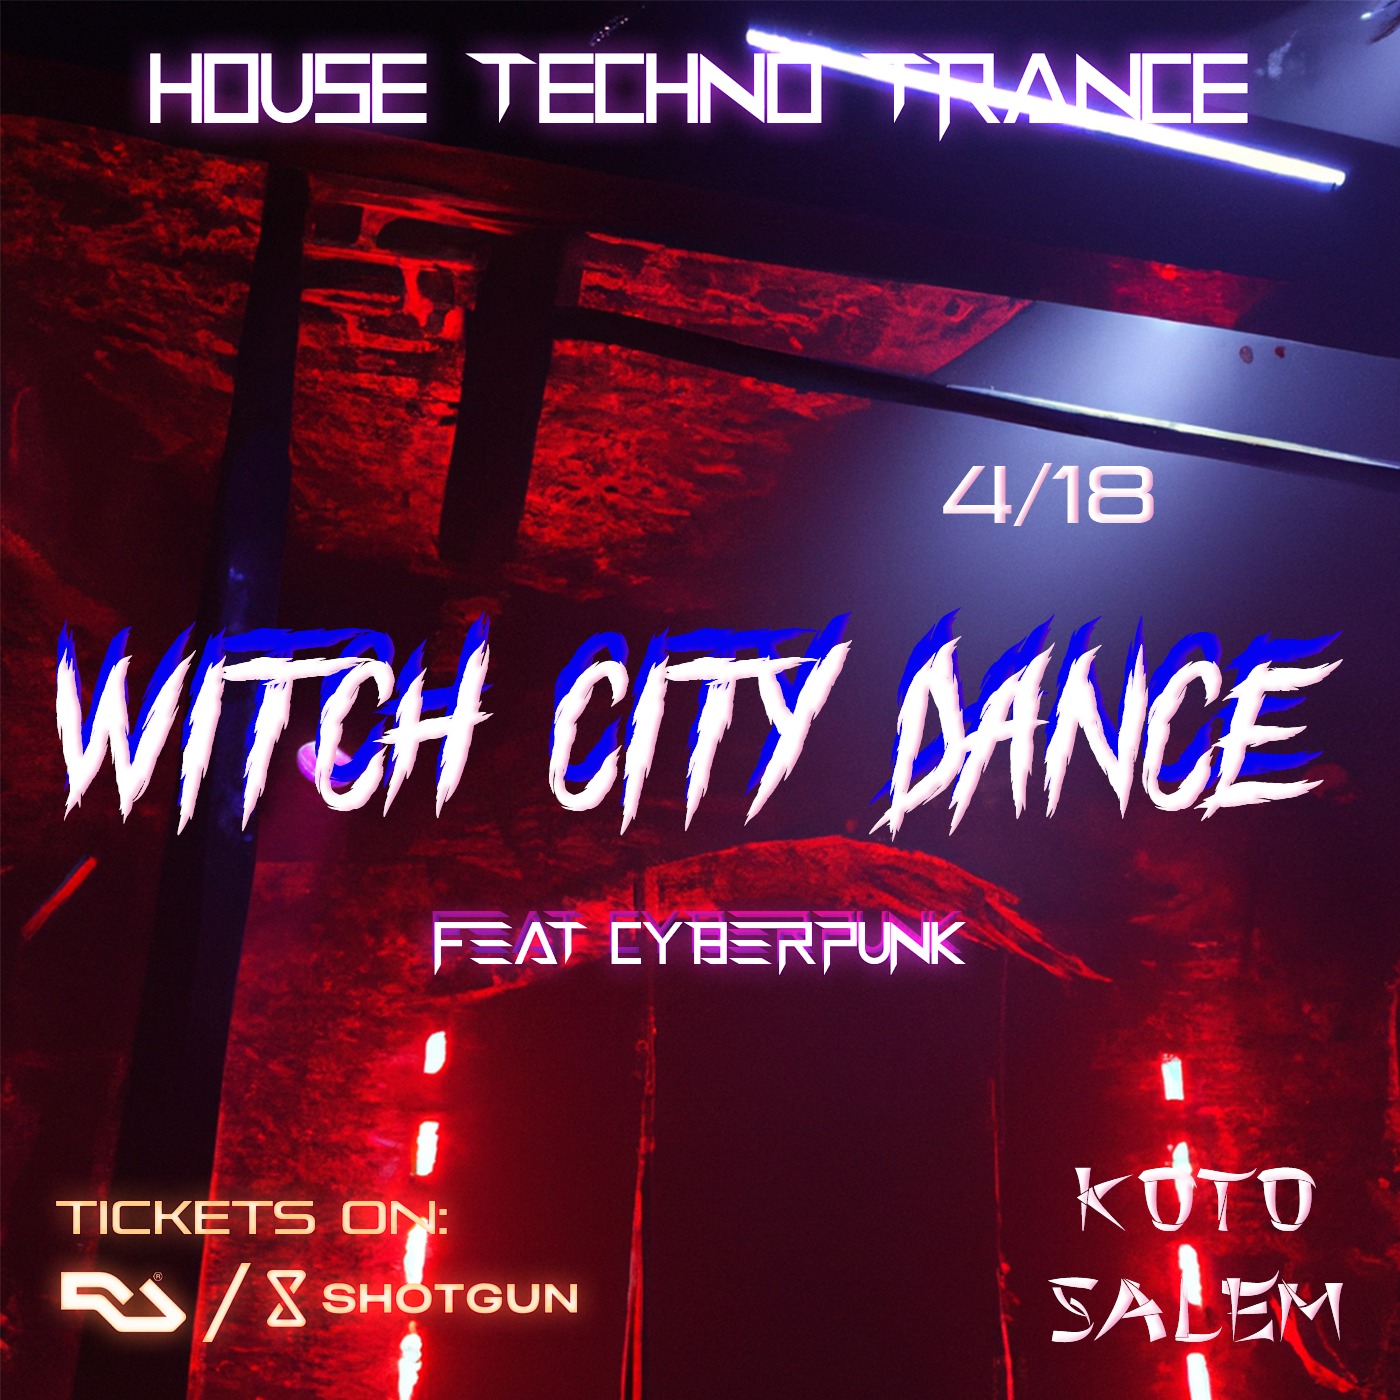 Join us for the "Witch City Dance" event on April 18th. Embrace the beats of house, techno, and trance music set against a cyberpunk backdrop. The ambiance features a low-light area adorned with magnificent neon signs. Ignite your night with electrifying tunes and step into an immersive experience like no other!